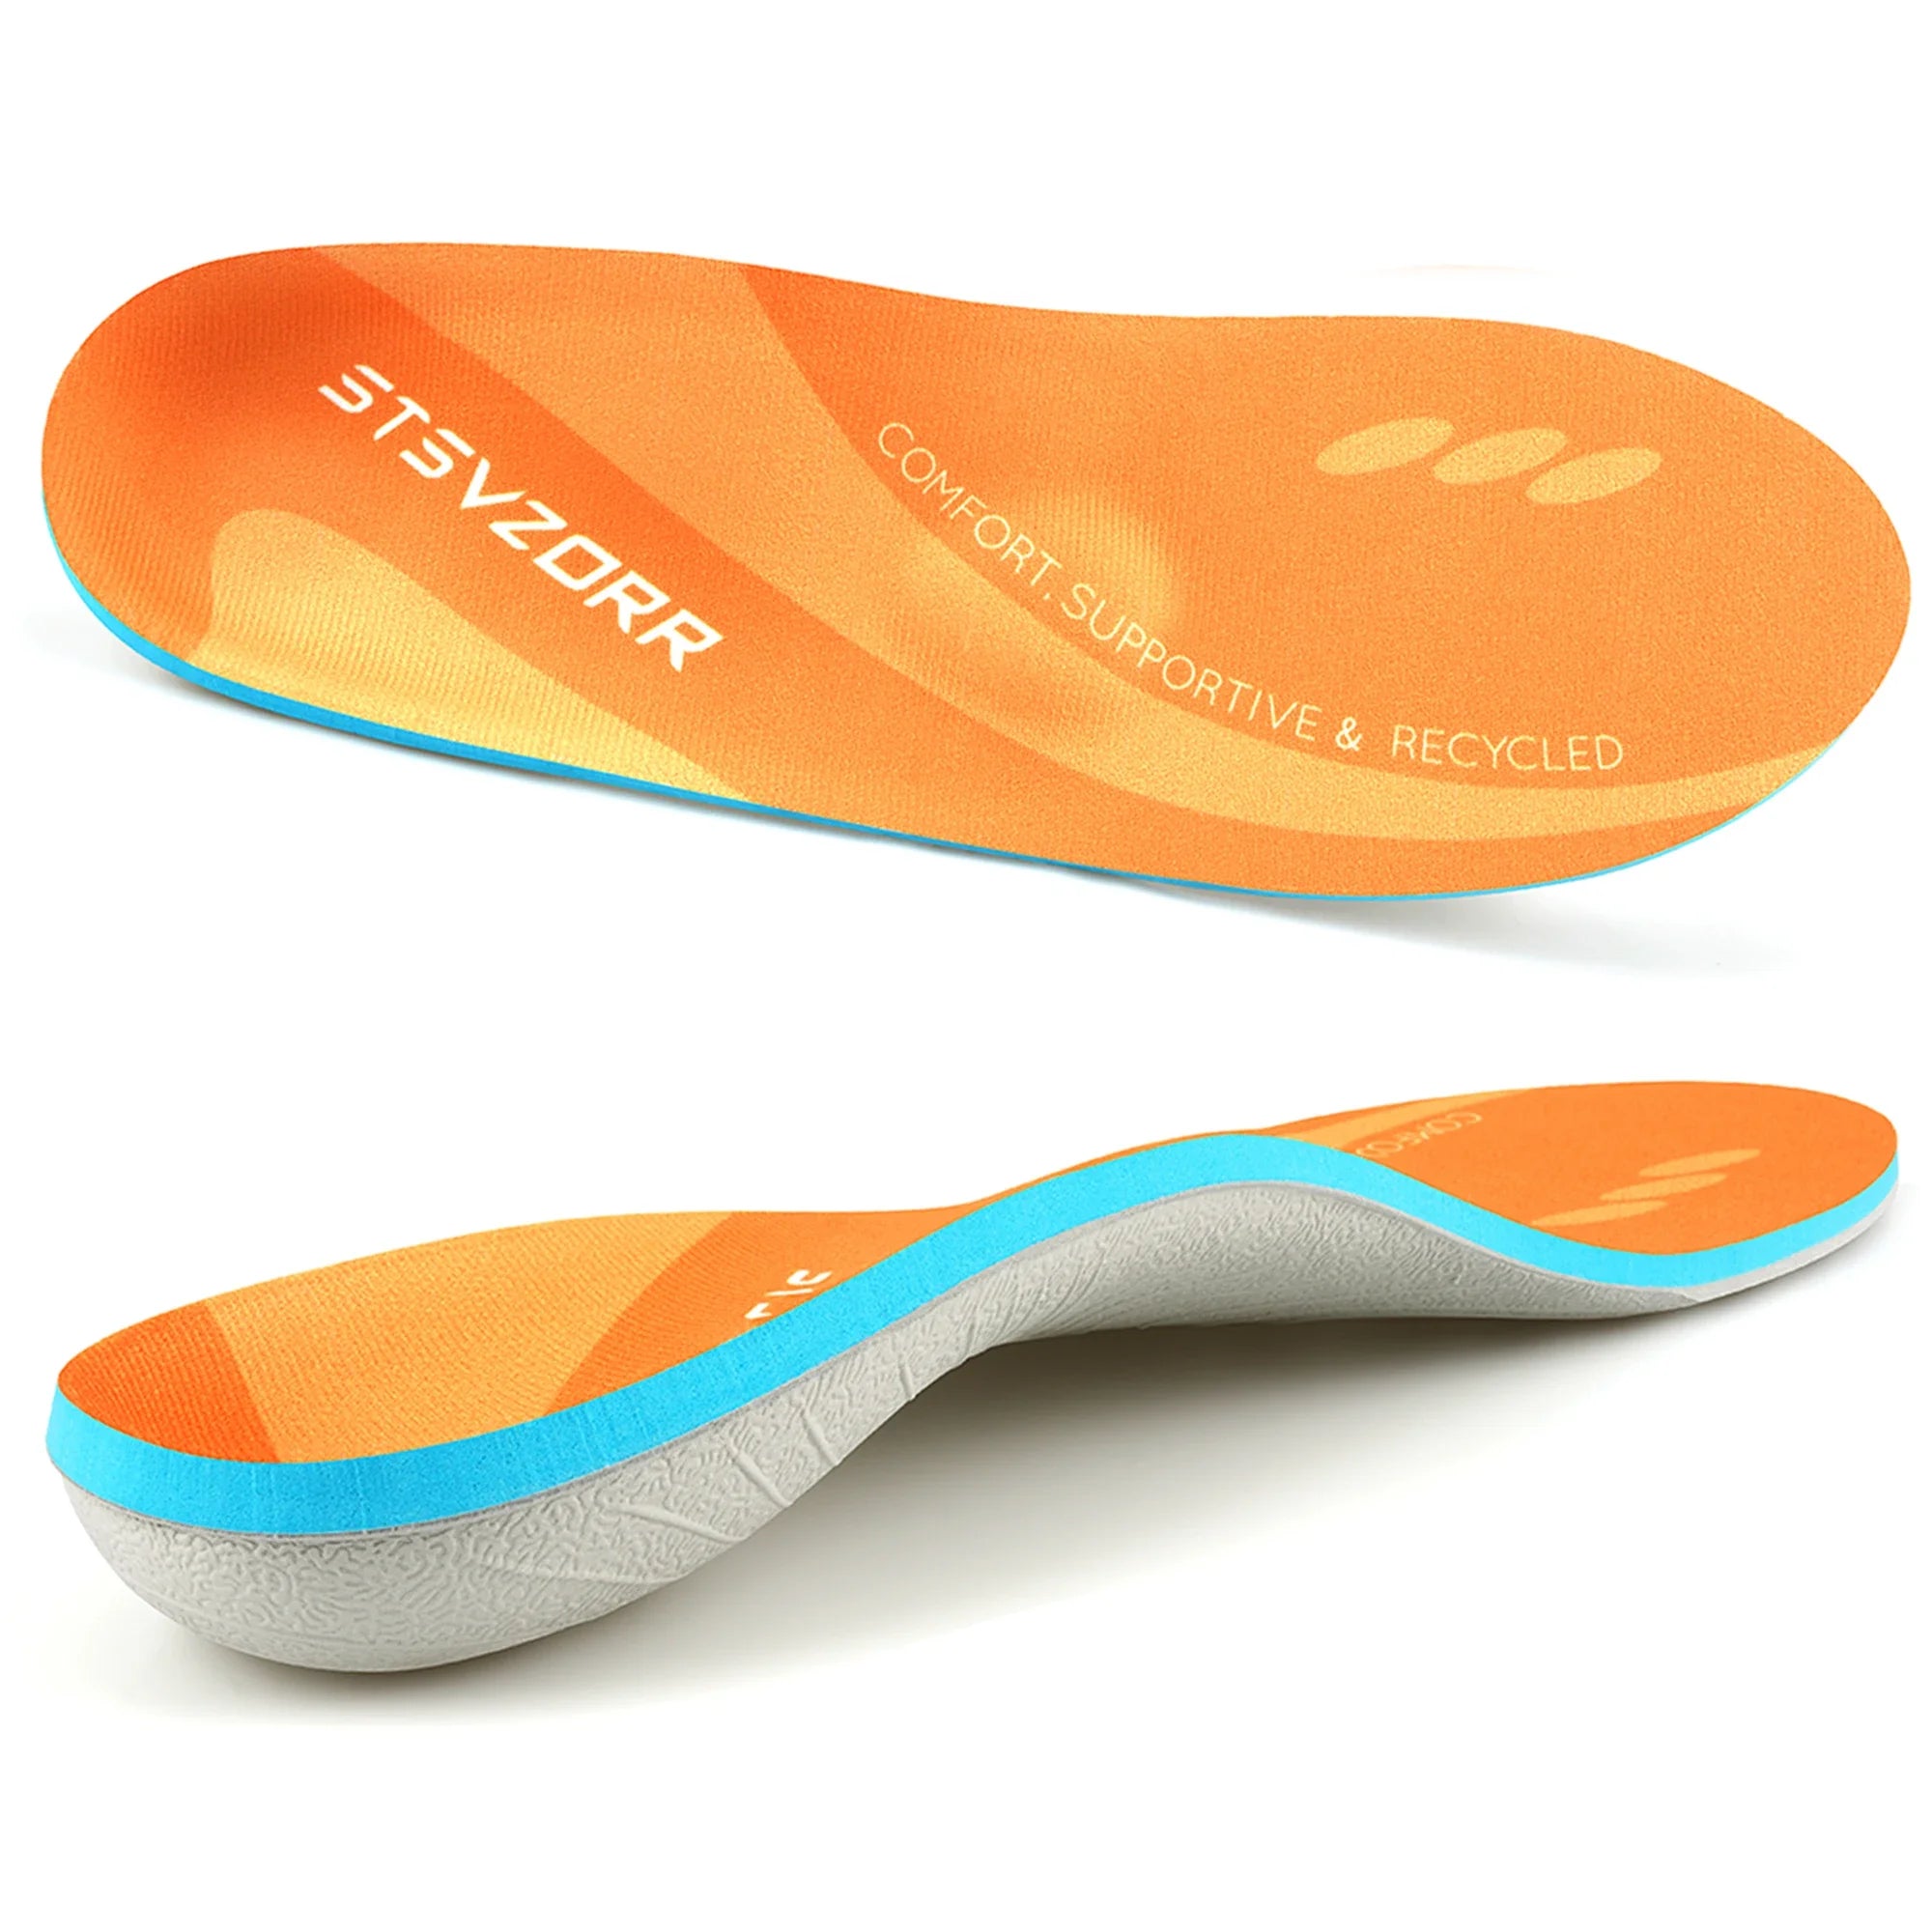 Cloud Discoveries Plantar Fasciitis Orthopedic Sport Insole for Sneakers - Men and Women Arch Support Orthotic Insoles Insert Sole